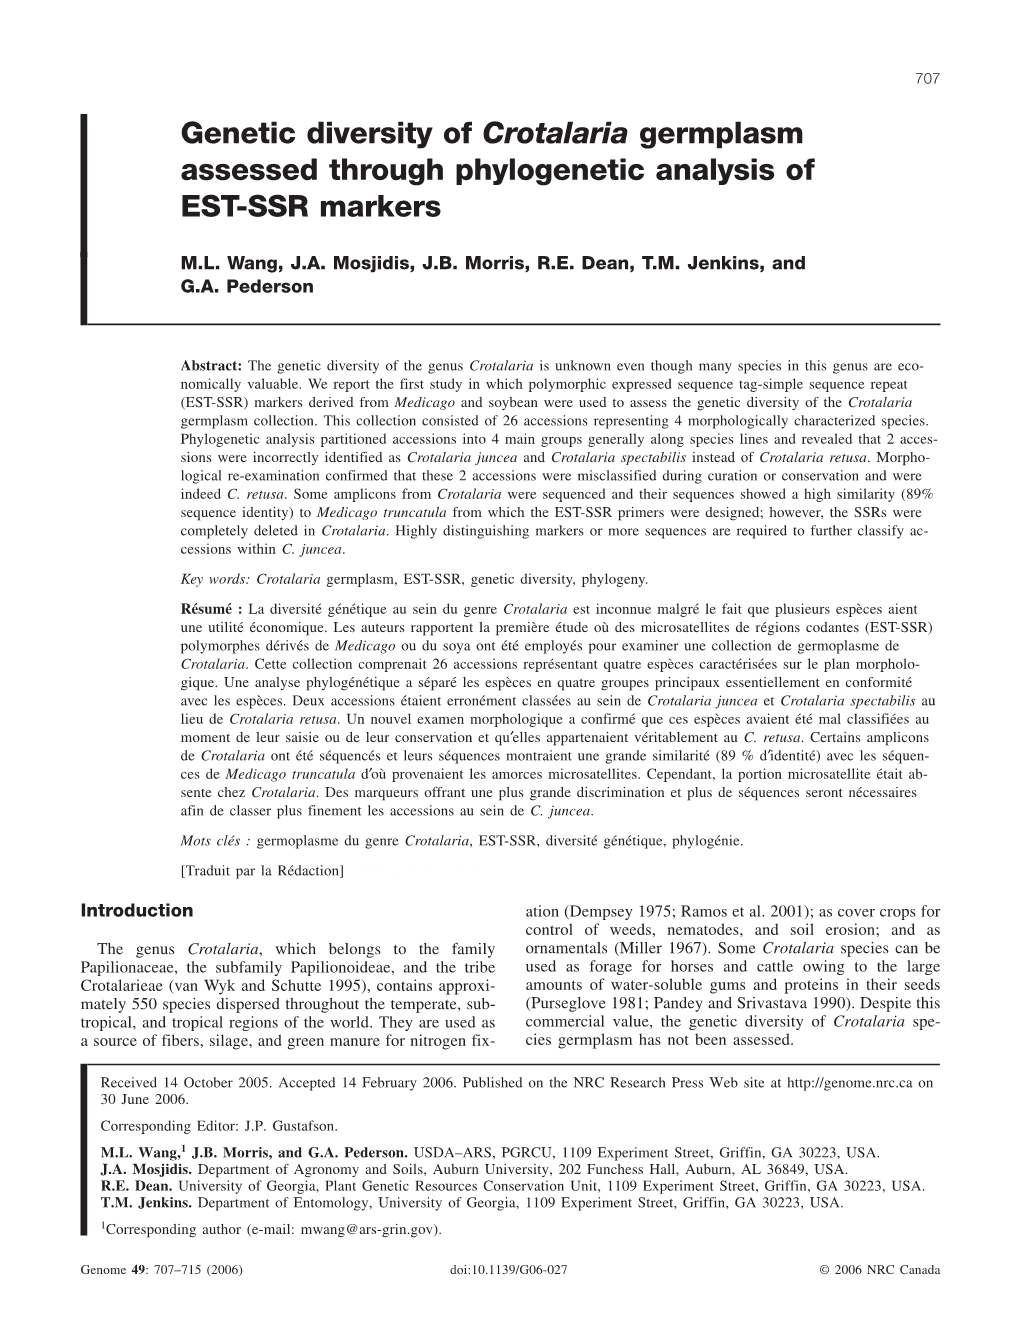 Genetic Diversity of Crotalaria Germplasm Assessed Through Phylogenetic Analysis of EST-SSR Markers